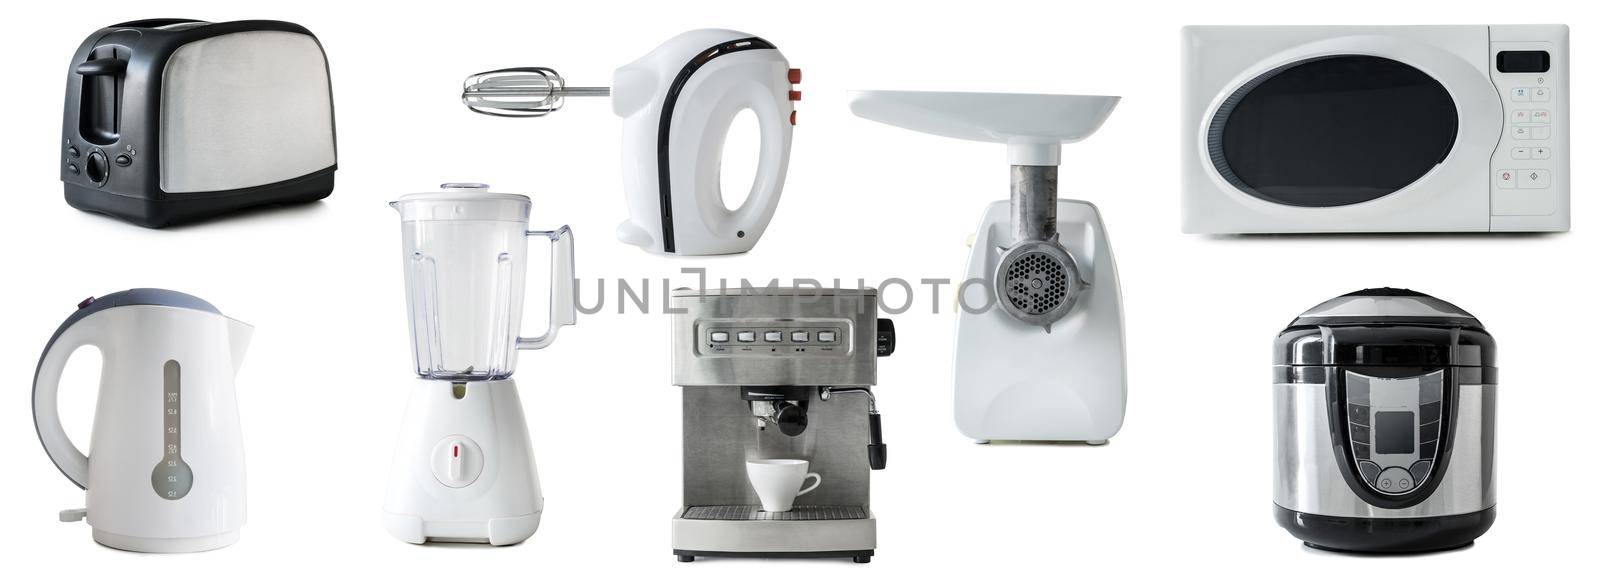 collage of different types of kitchen appliances isolated on white background